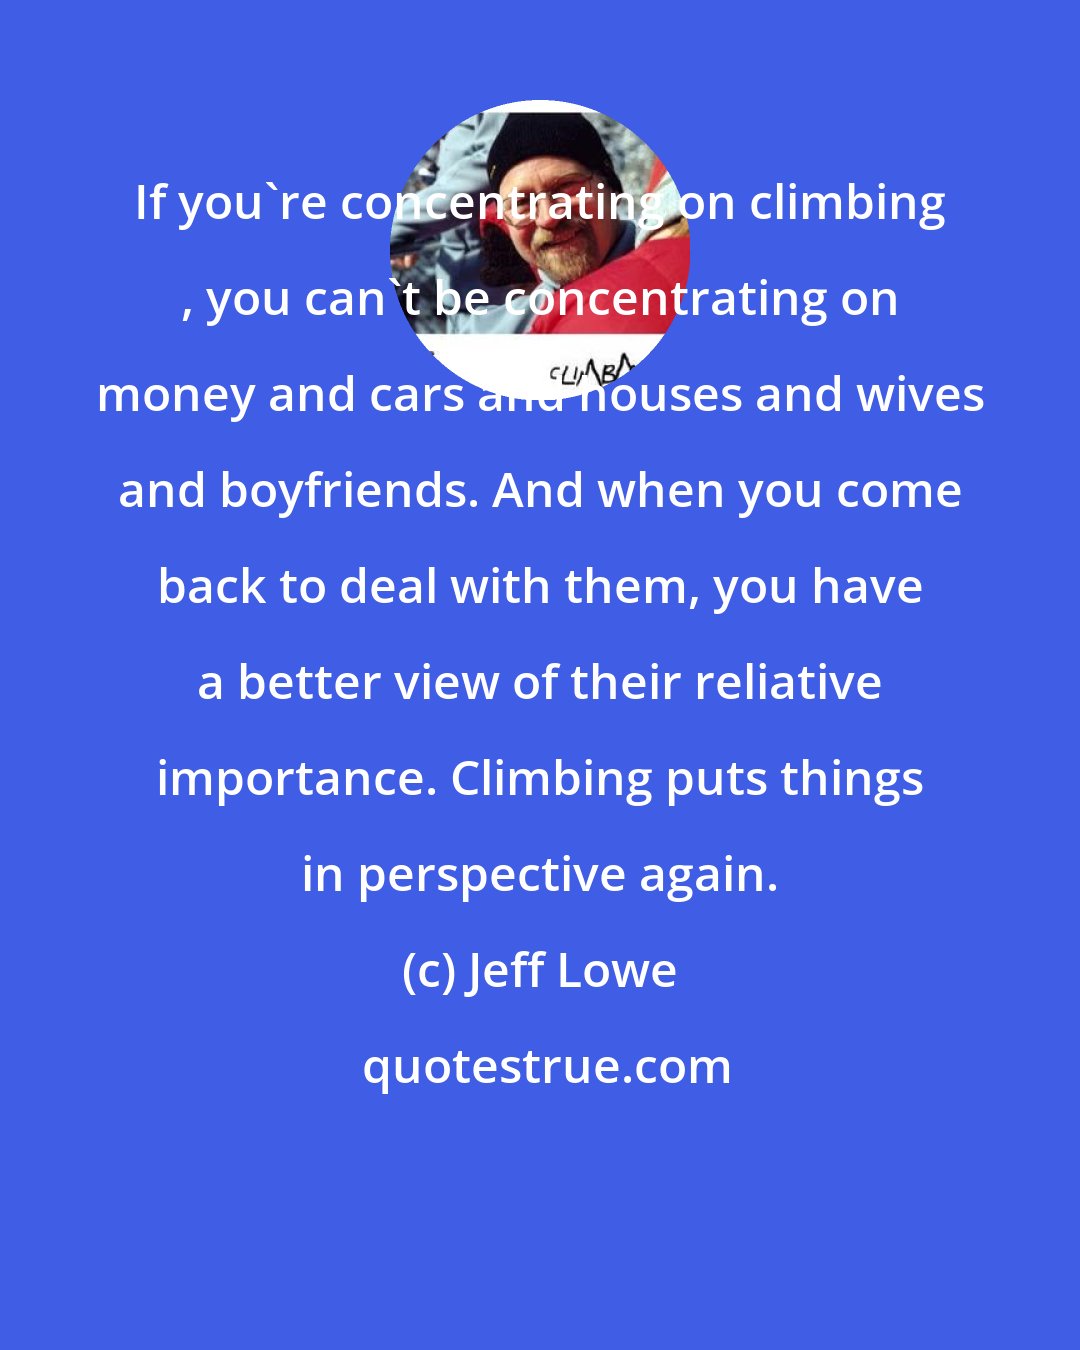 Jeff Lowe: If you're concentrating on climbing , you can't be concentrating on money and cars and houses and wives and boyfriends. And when you come back to deal with them, you have a better view of their reliative importance. Climbing puts things in perspective again.